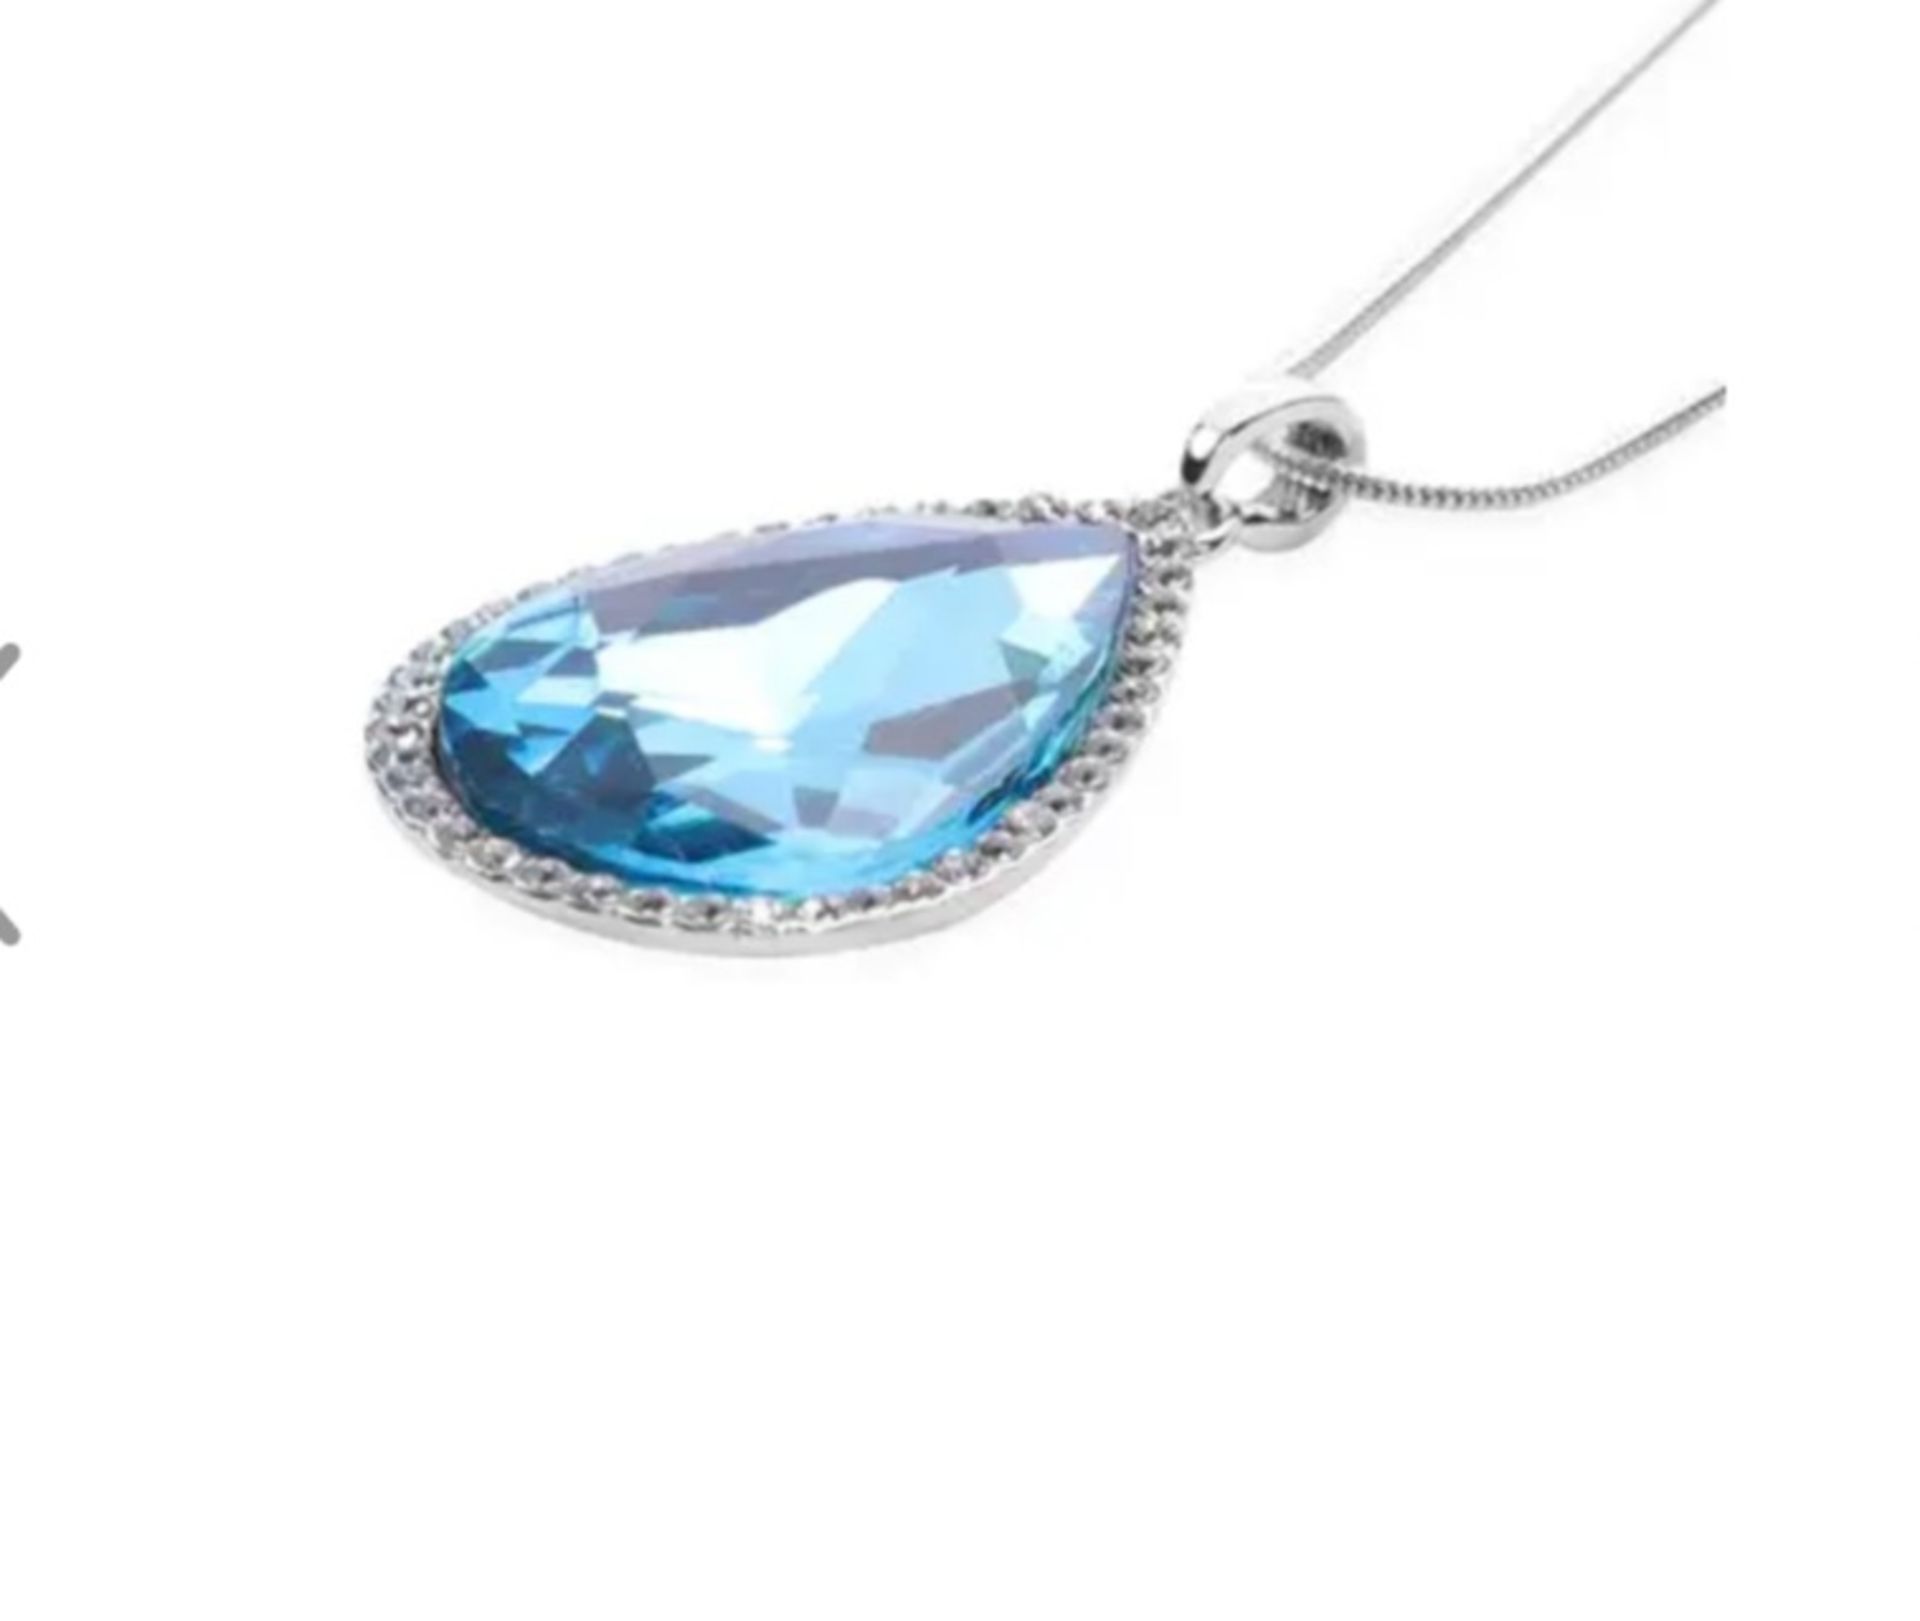 New! 3 Piece Set -Simulated Sky Blue Topaz, Austrian Crystal Pendant with Chain with Scarf - Image 2 of 3